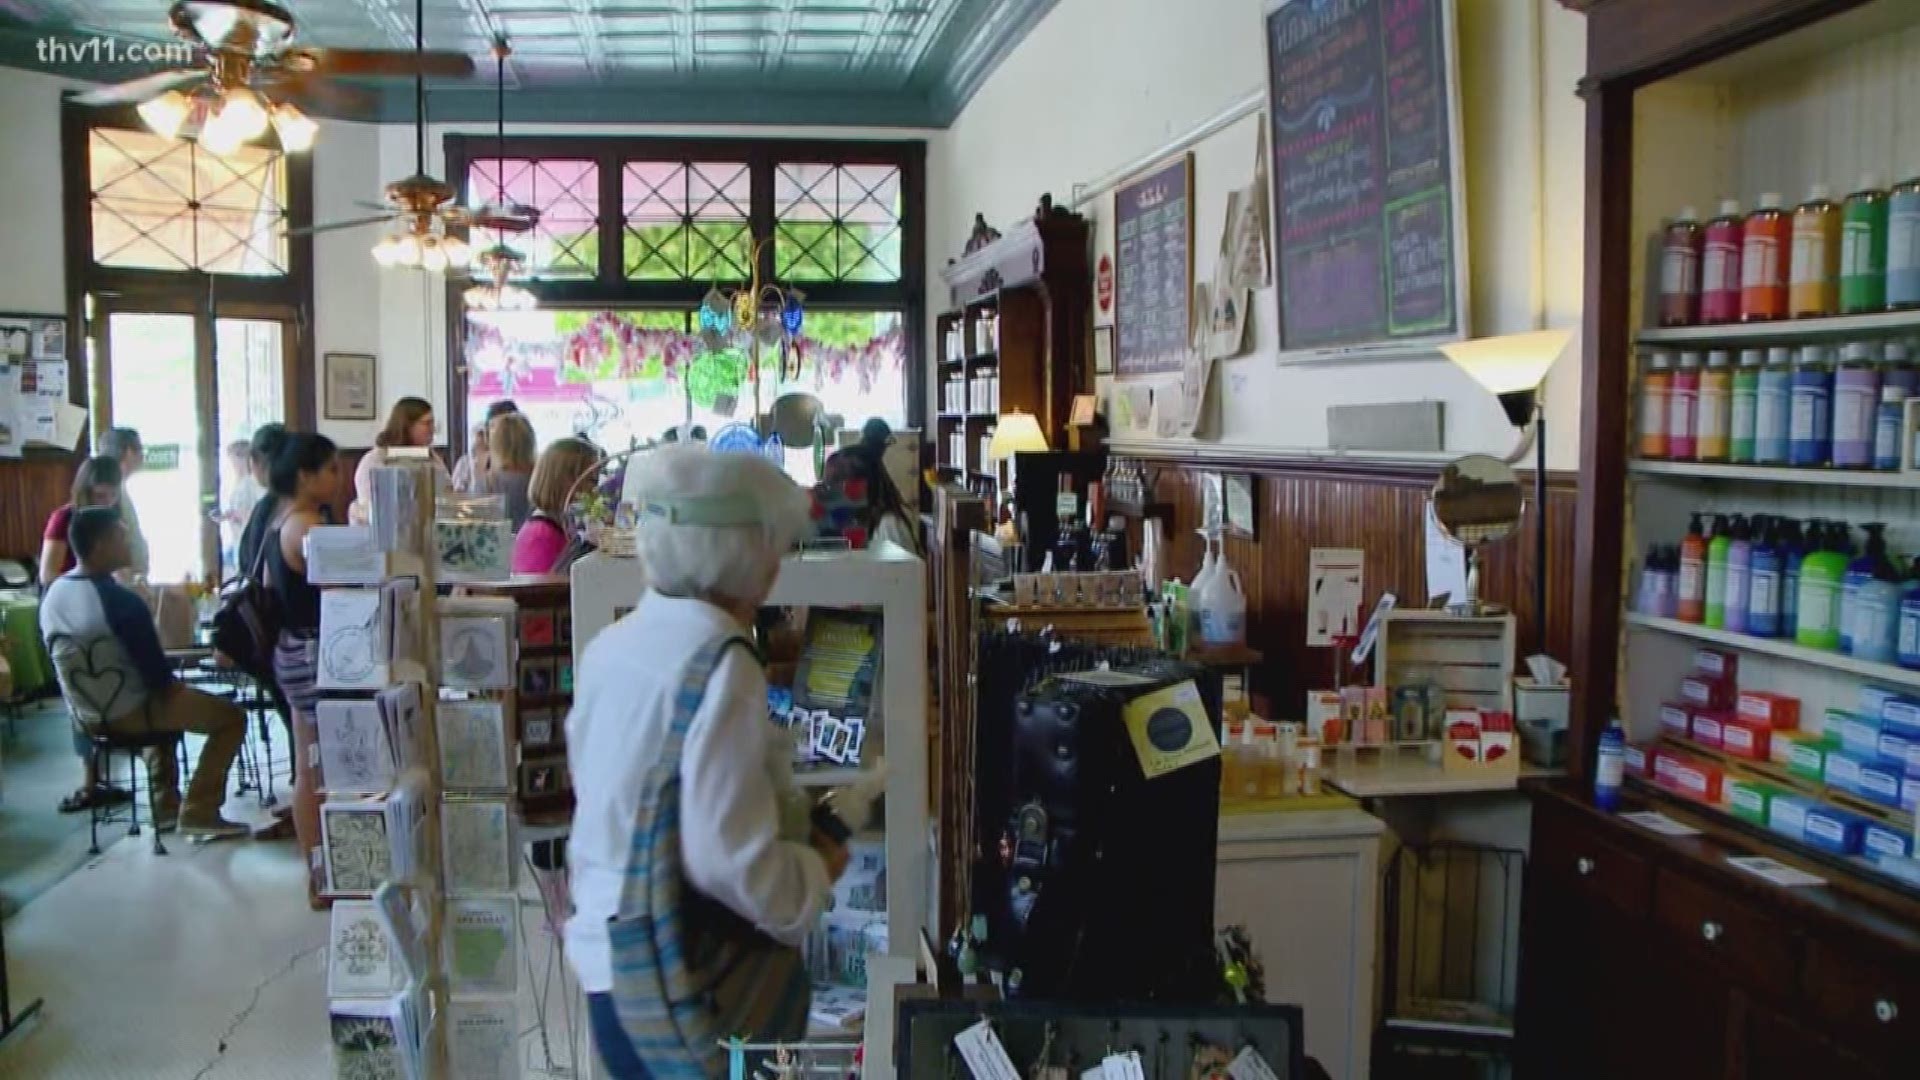 The Green Corner Store on South Main Street is celebrating its 10th anniversary this weekend, and the impact its made in those 10 years.